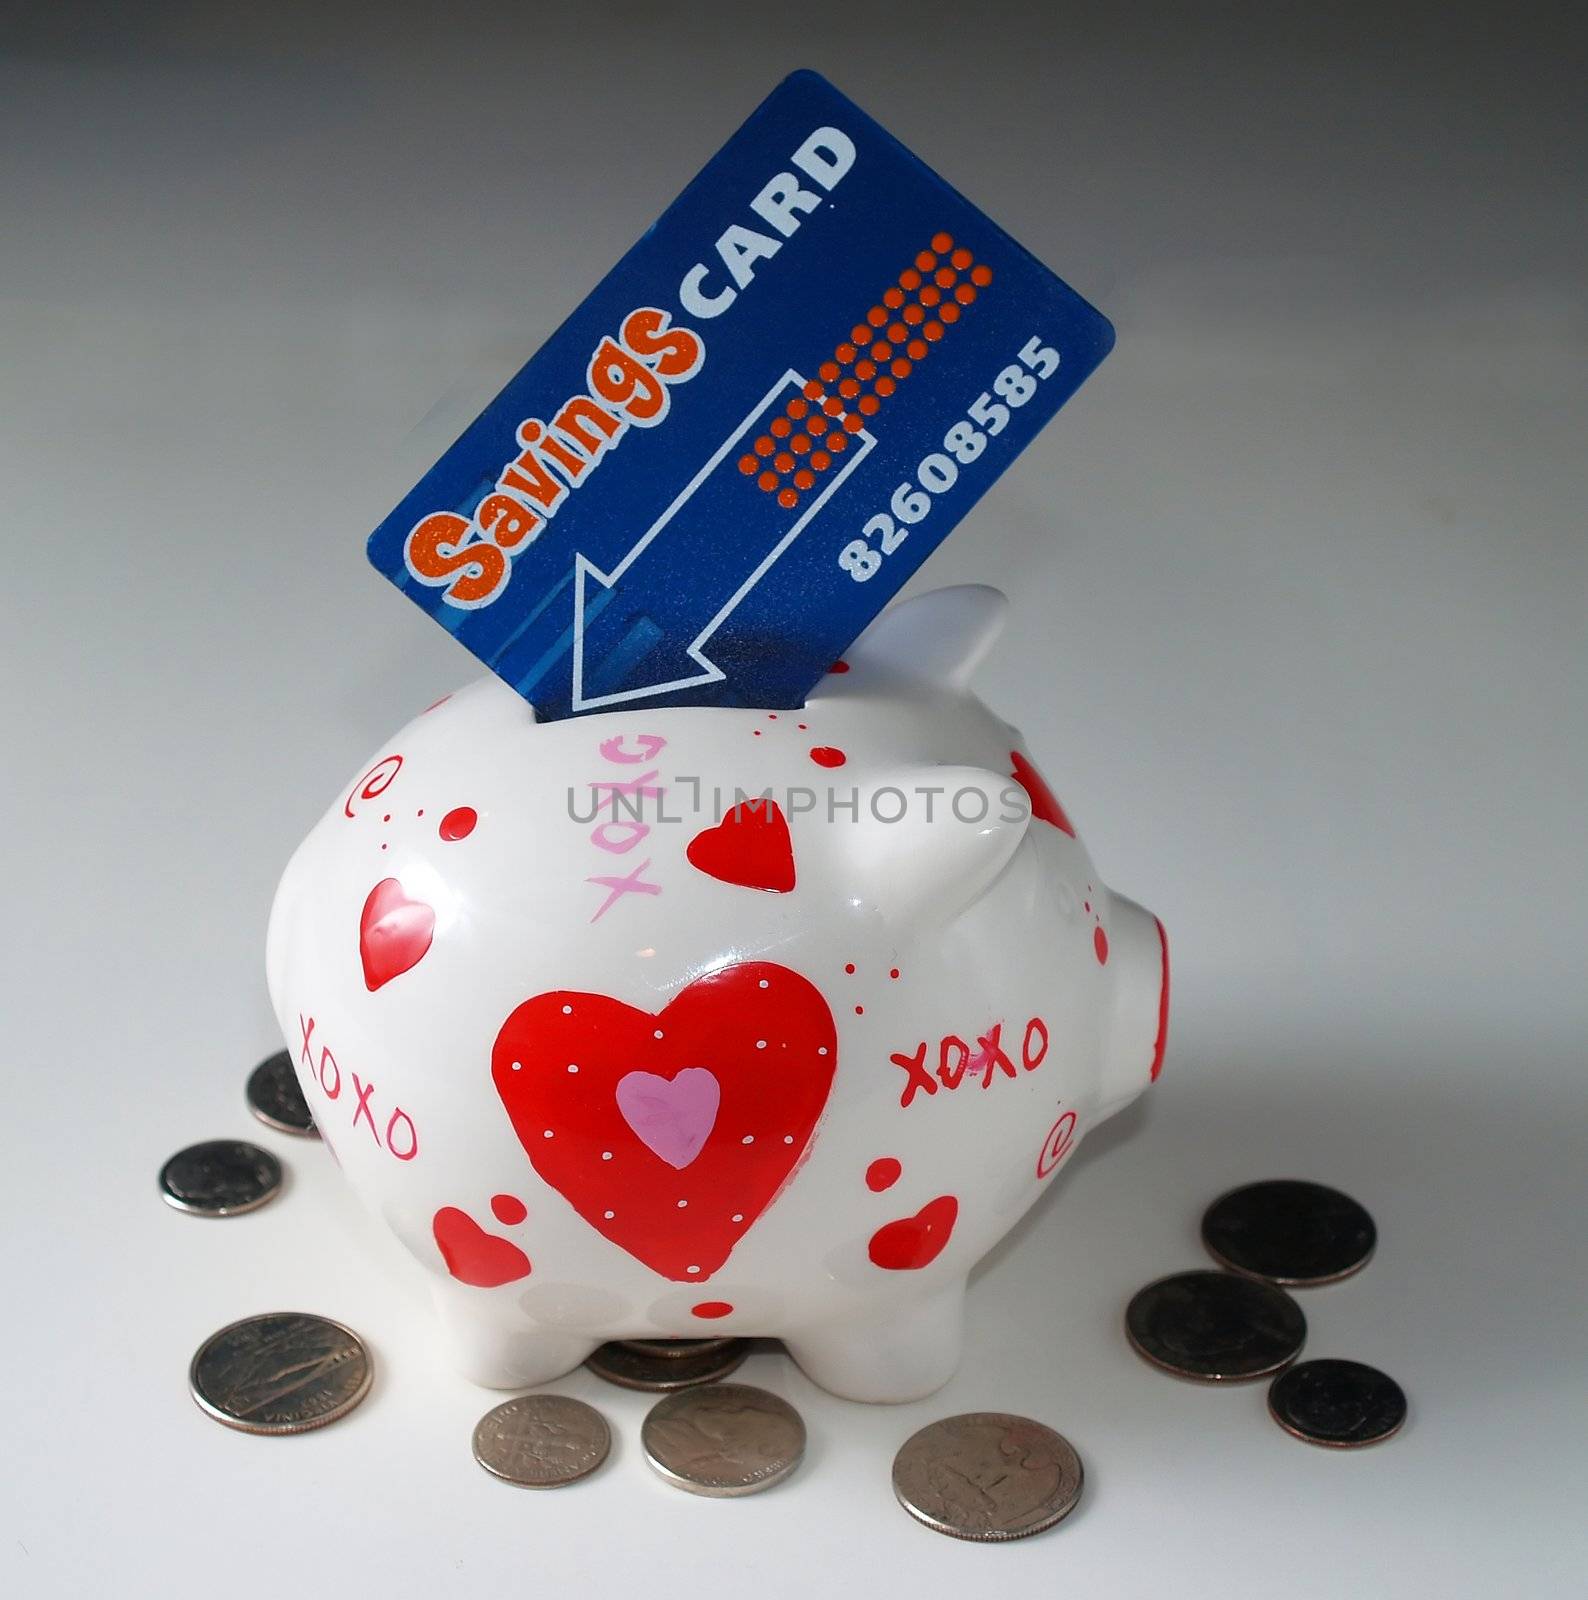 piggy bank and  saving card on the white background